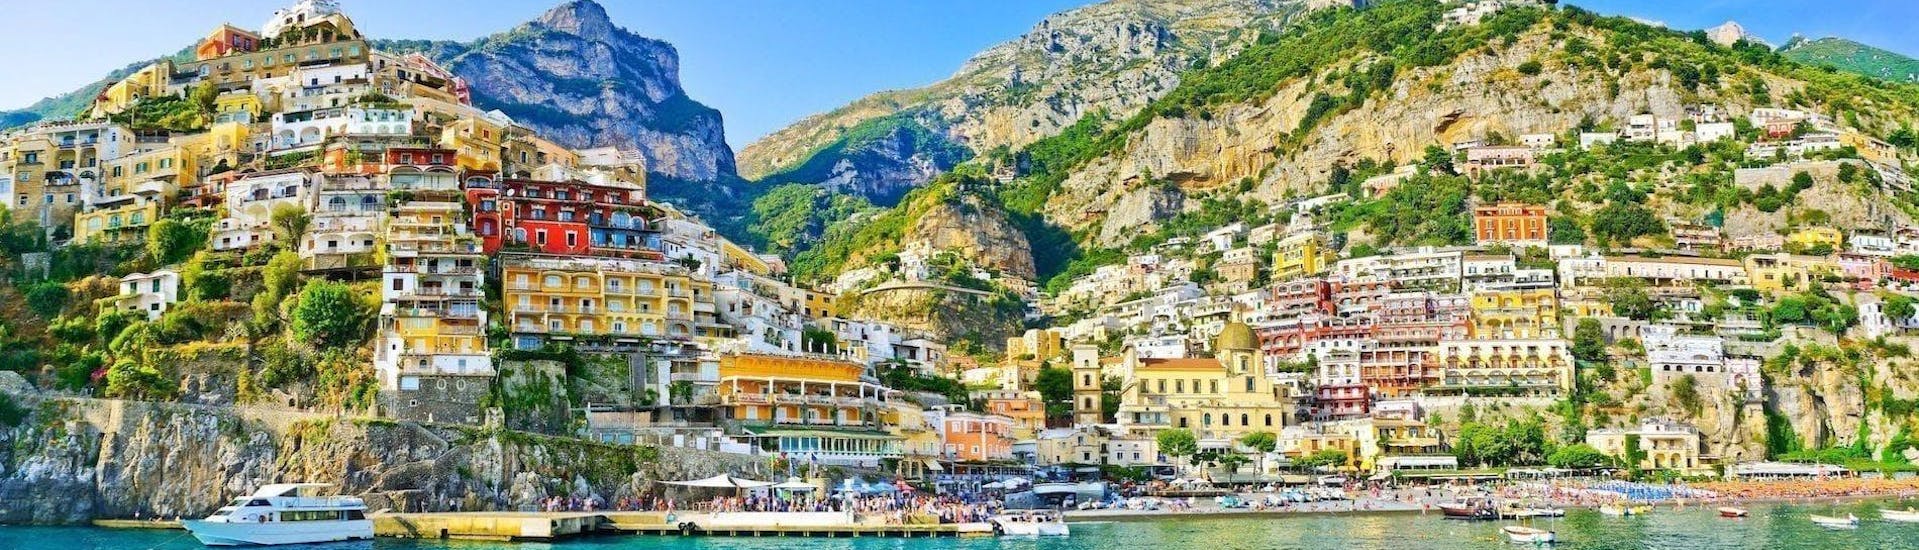 The view of Amalfi from the sea is one of the highlights of this Private Boat Tour from Sorrento to Positano and Amalfi.